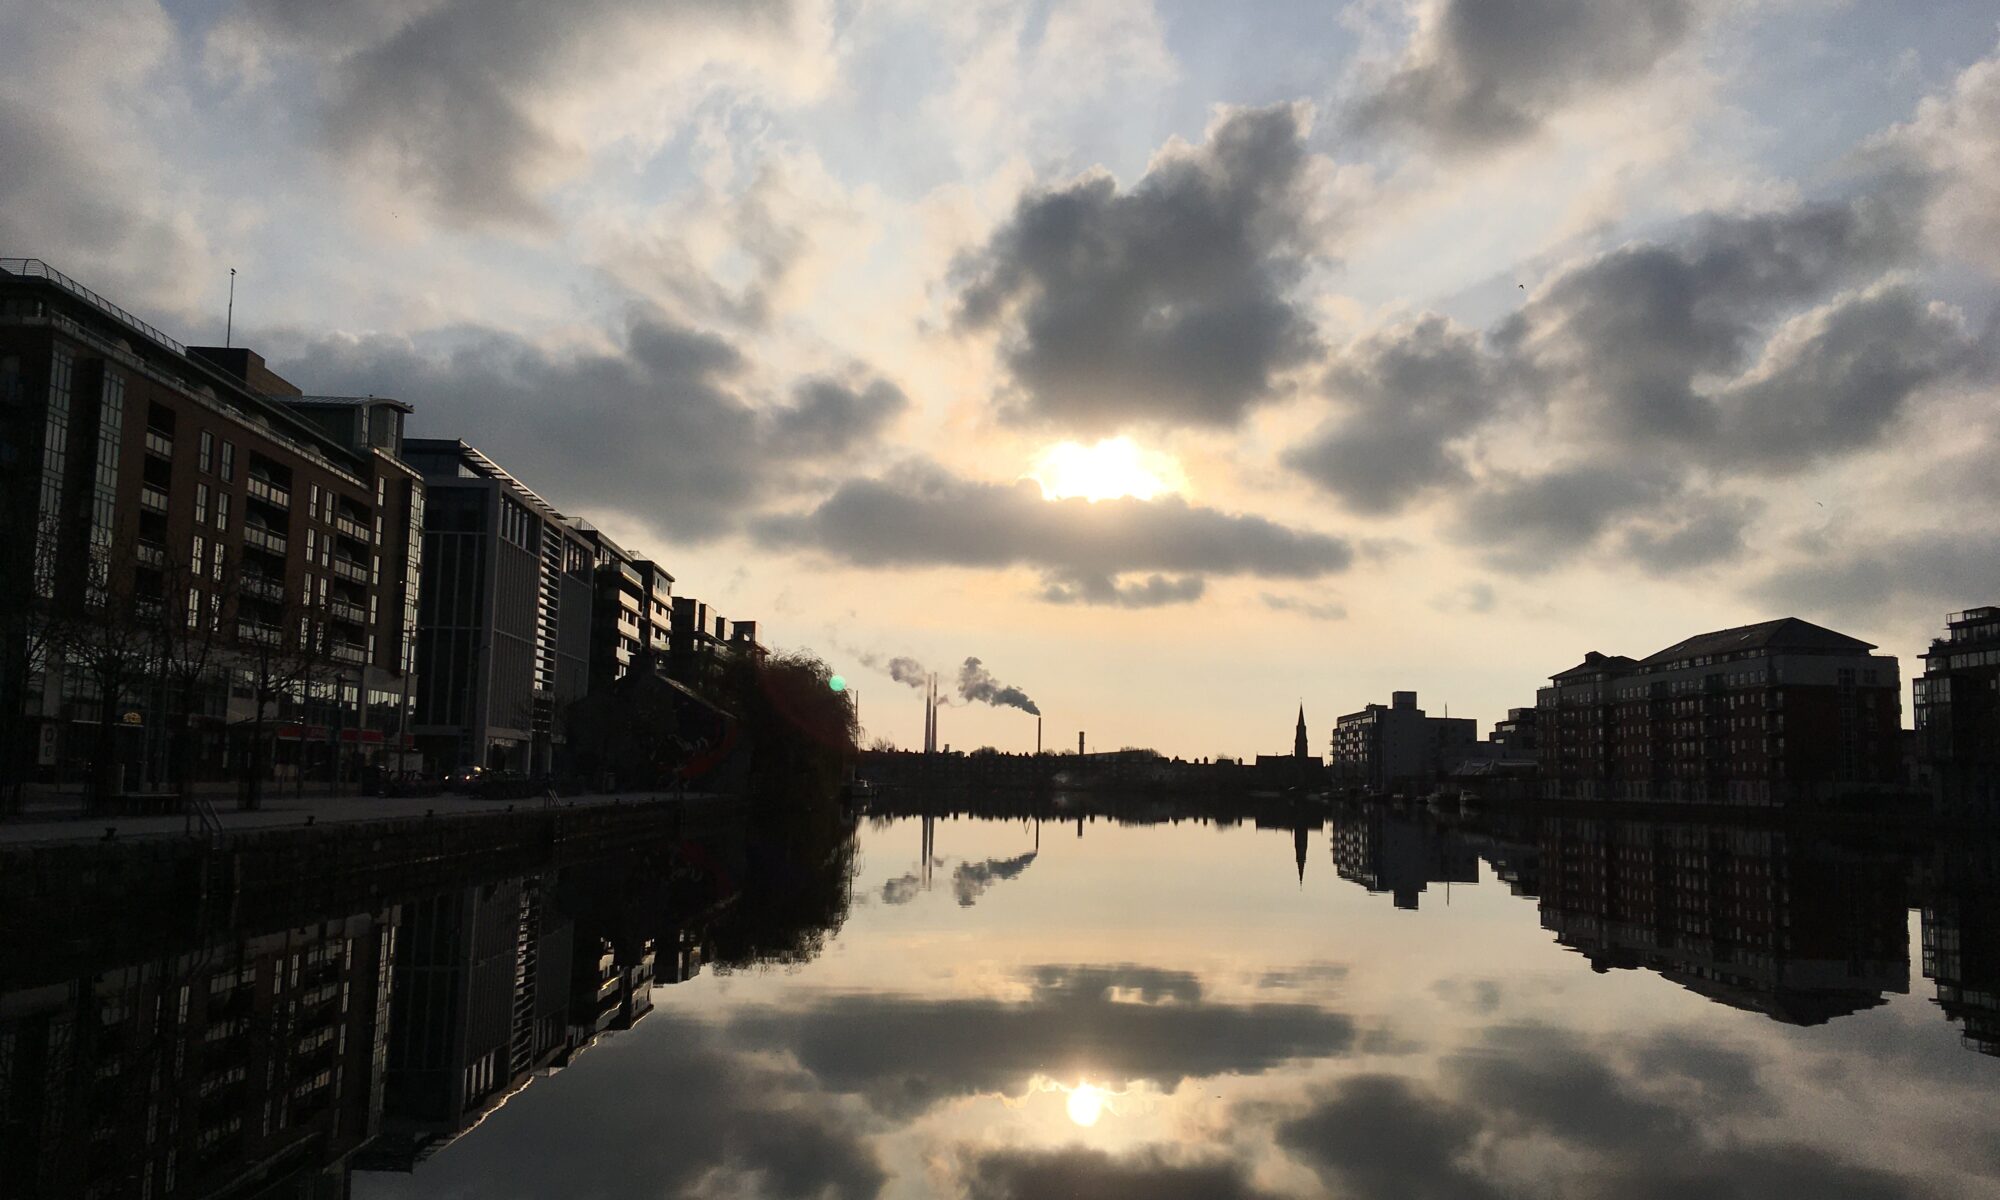 Sky reflecting on water at Grand Canal Dock Dublin